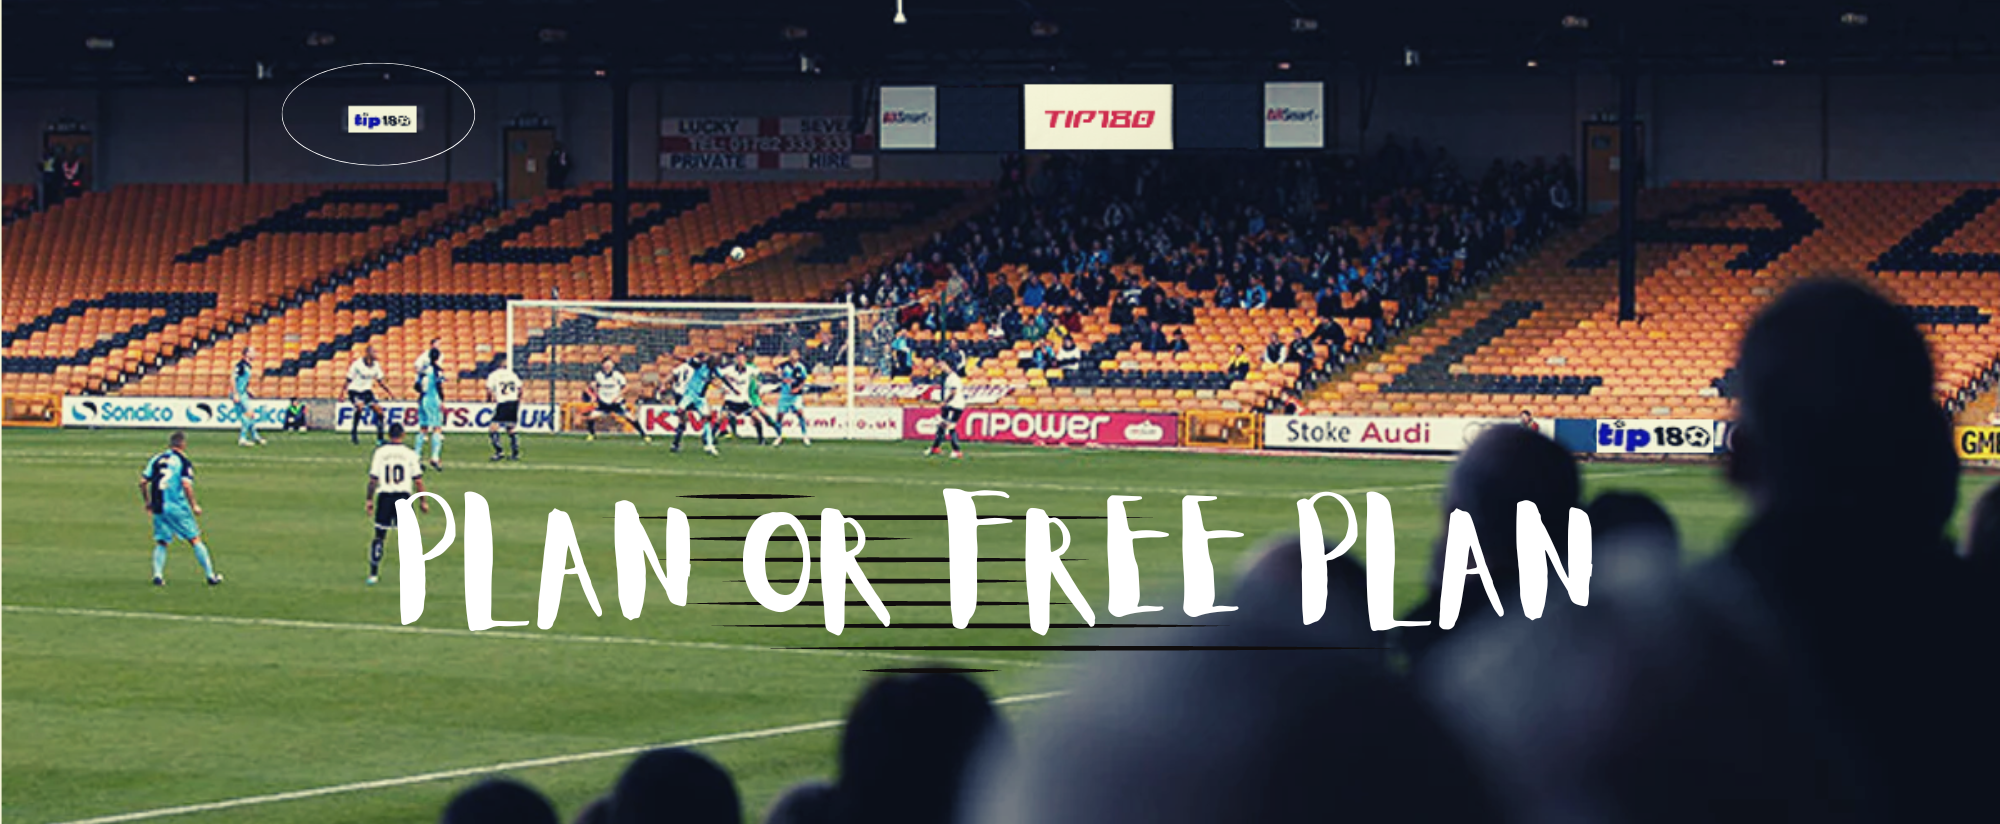 "Plan or free plan" words on a soccer arena background